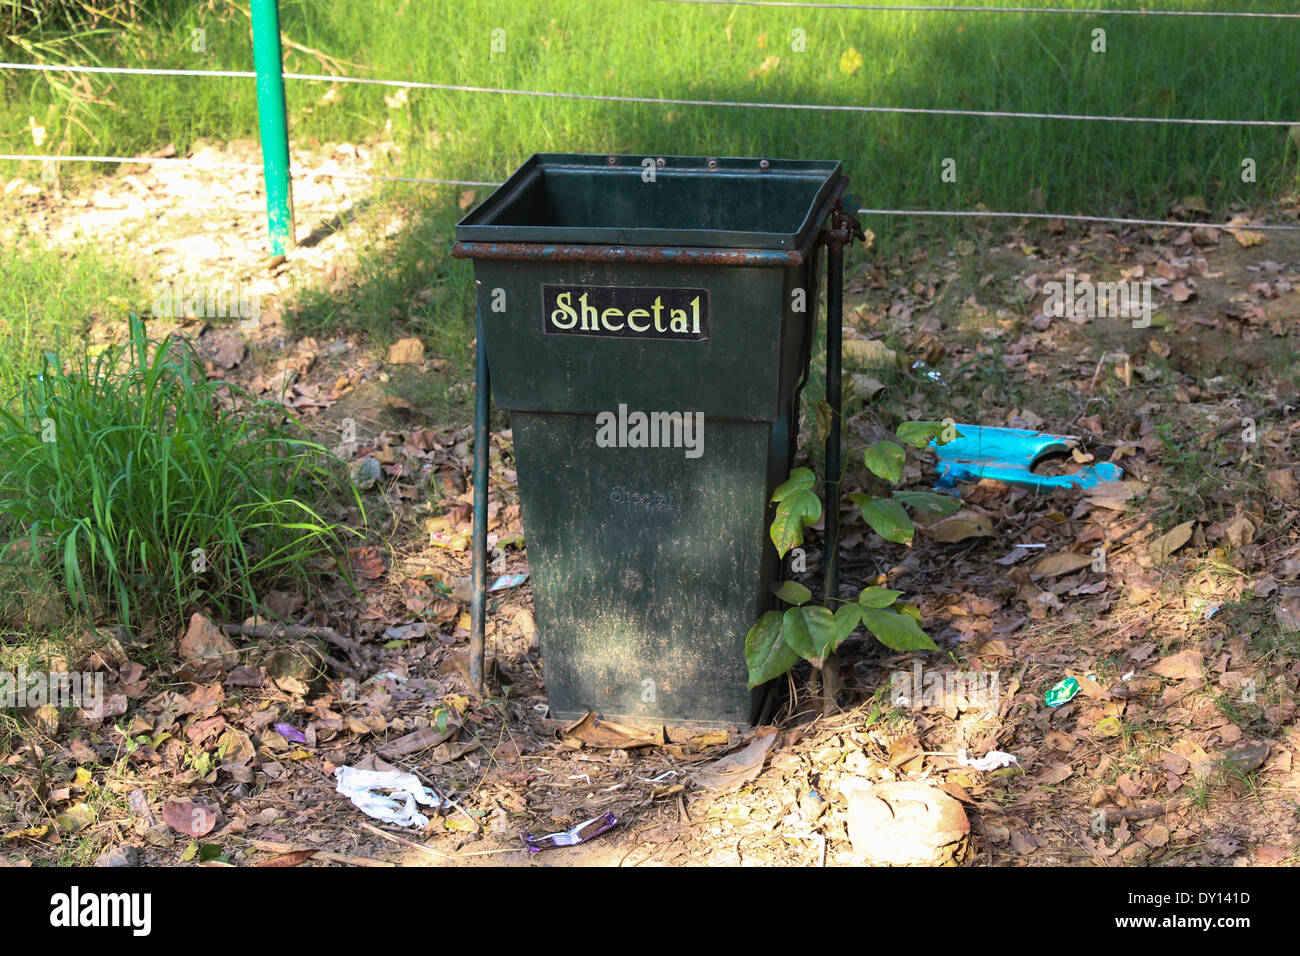 A rubbish bin inside the Delhi zoo, nestled among old leaves, with some grass nearby and some wire fences at the back Stock Photo